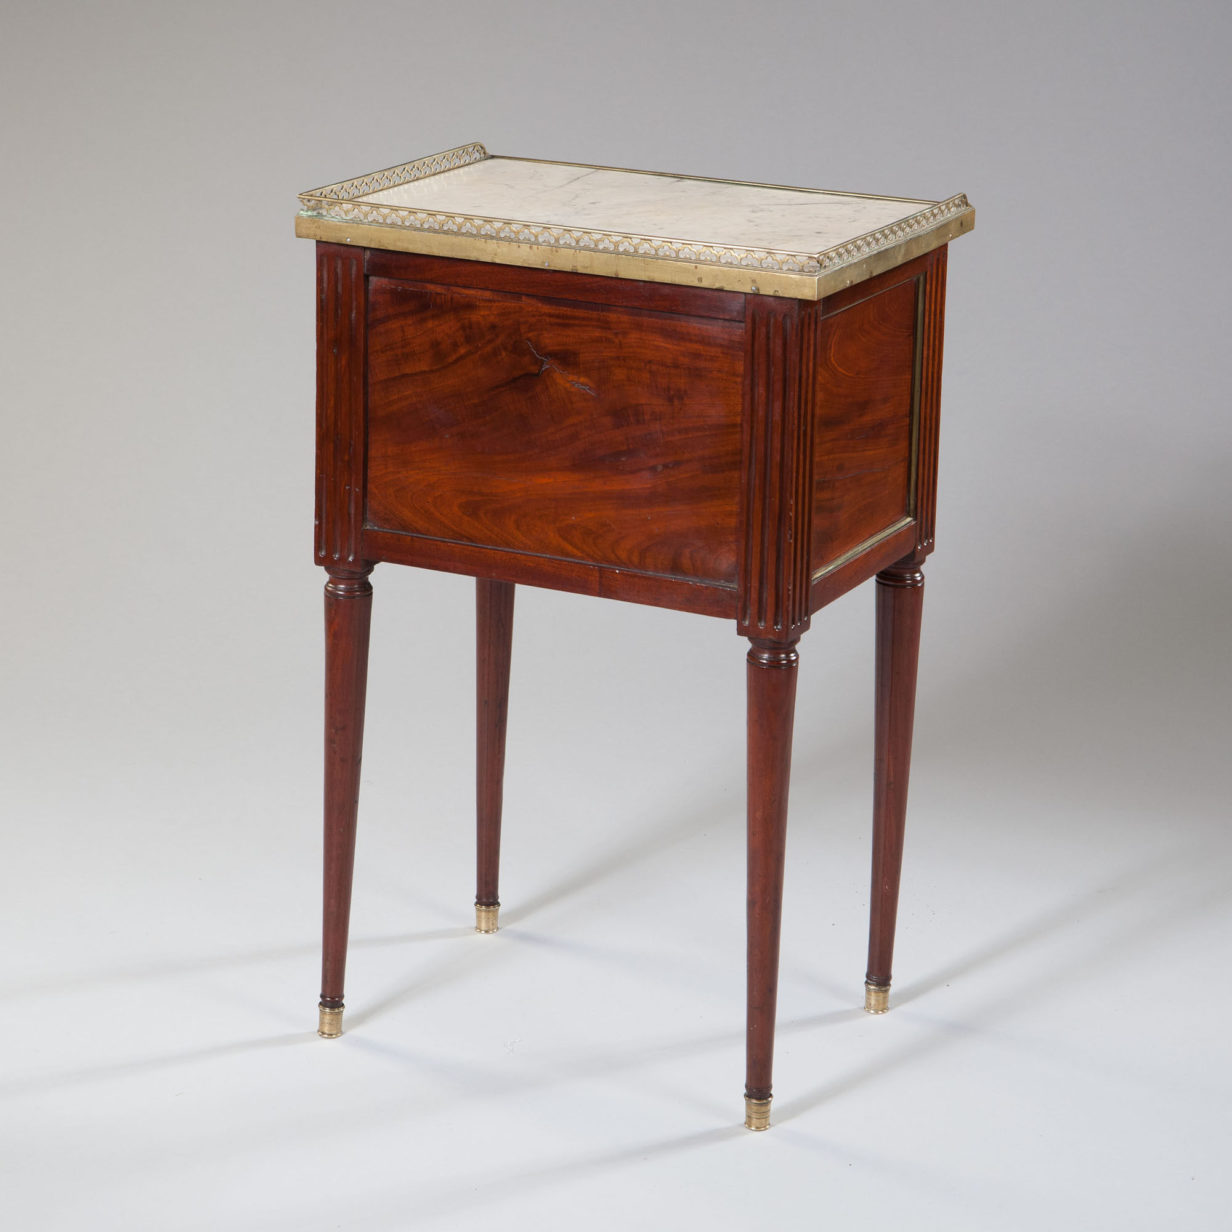 A late 18th century louis xvi period mahogany bedside cabinet